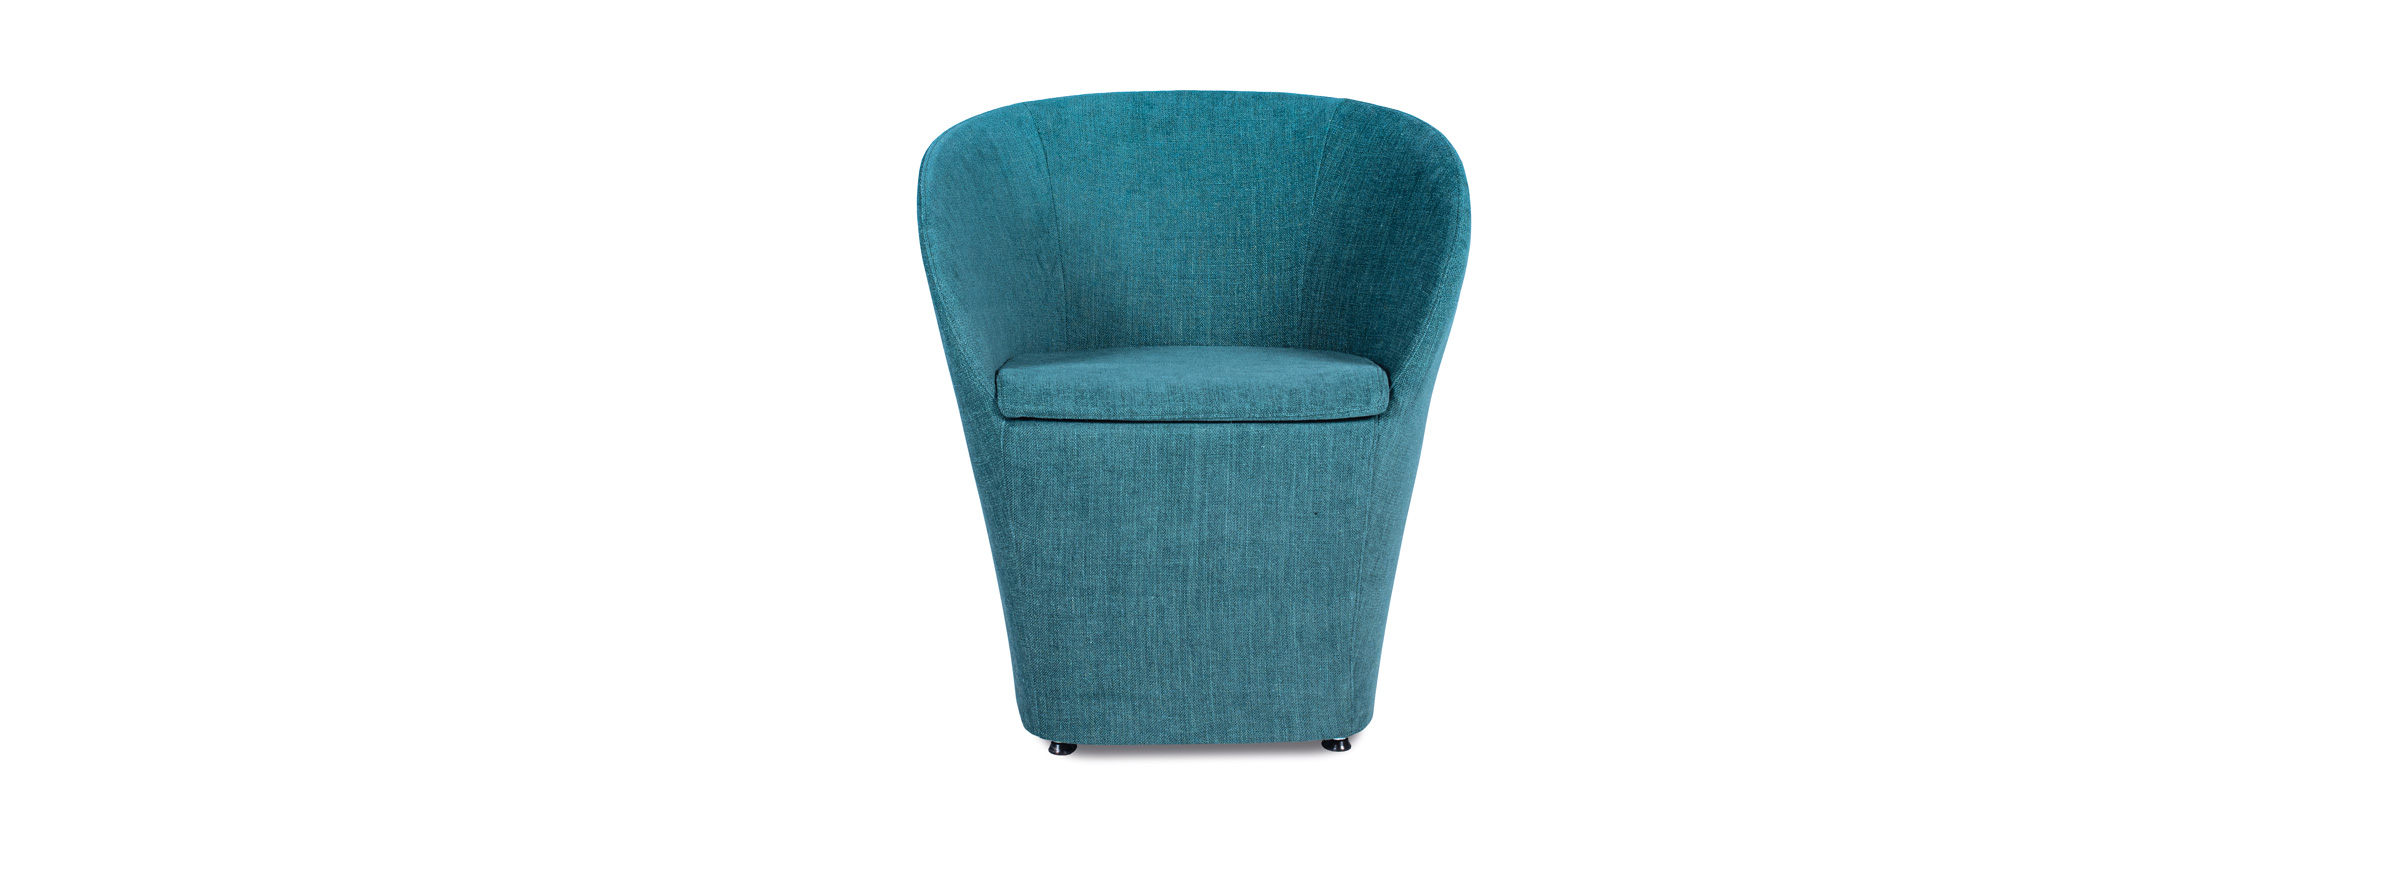 Désio-WALLACE-fauteuil-personnalisable-made-in-france-tissu-hotel-qualité